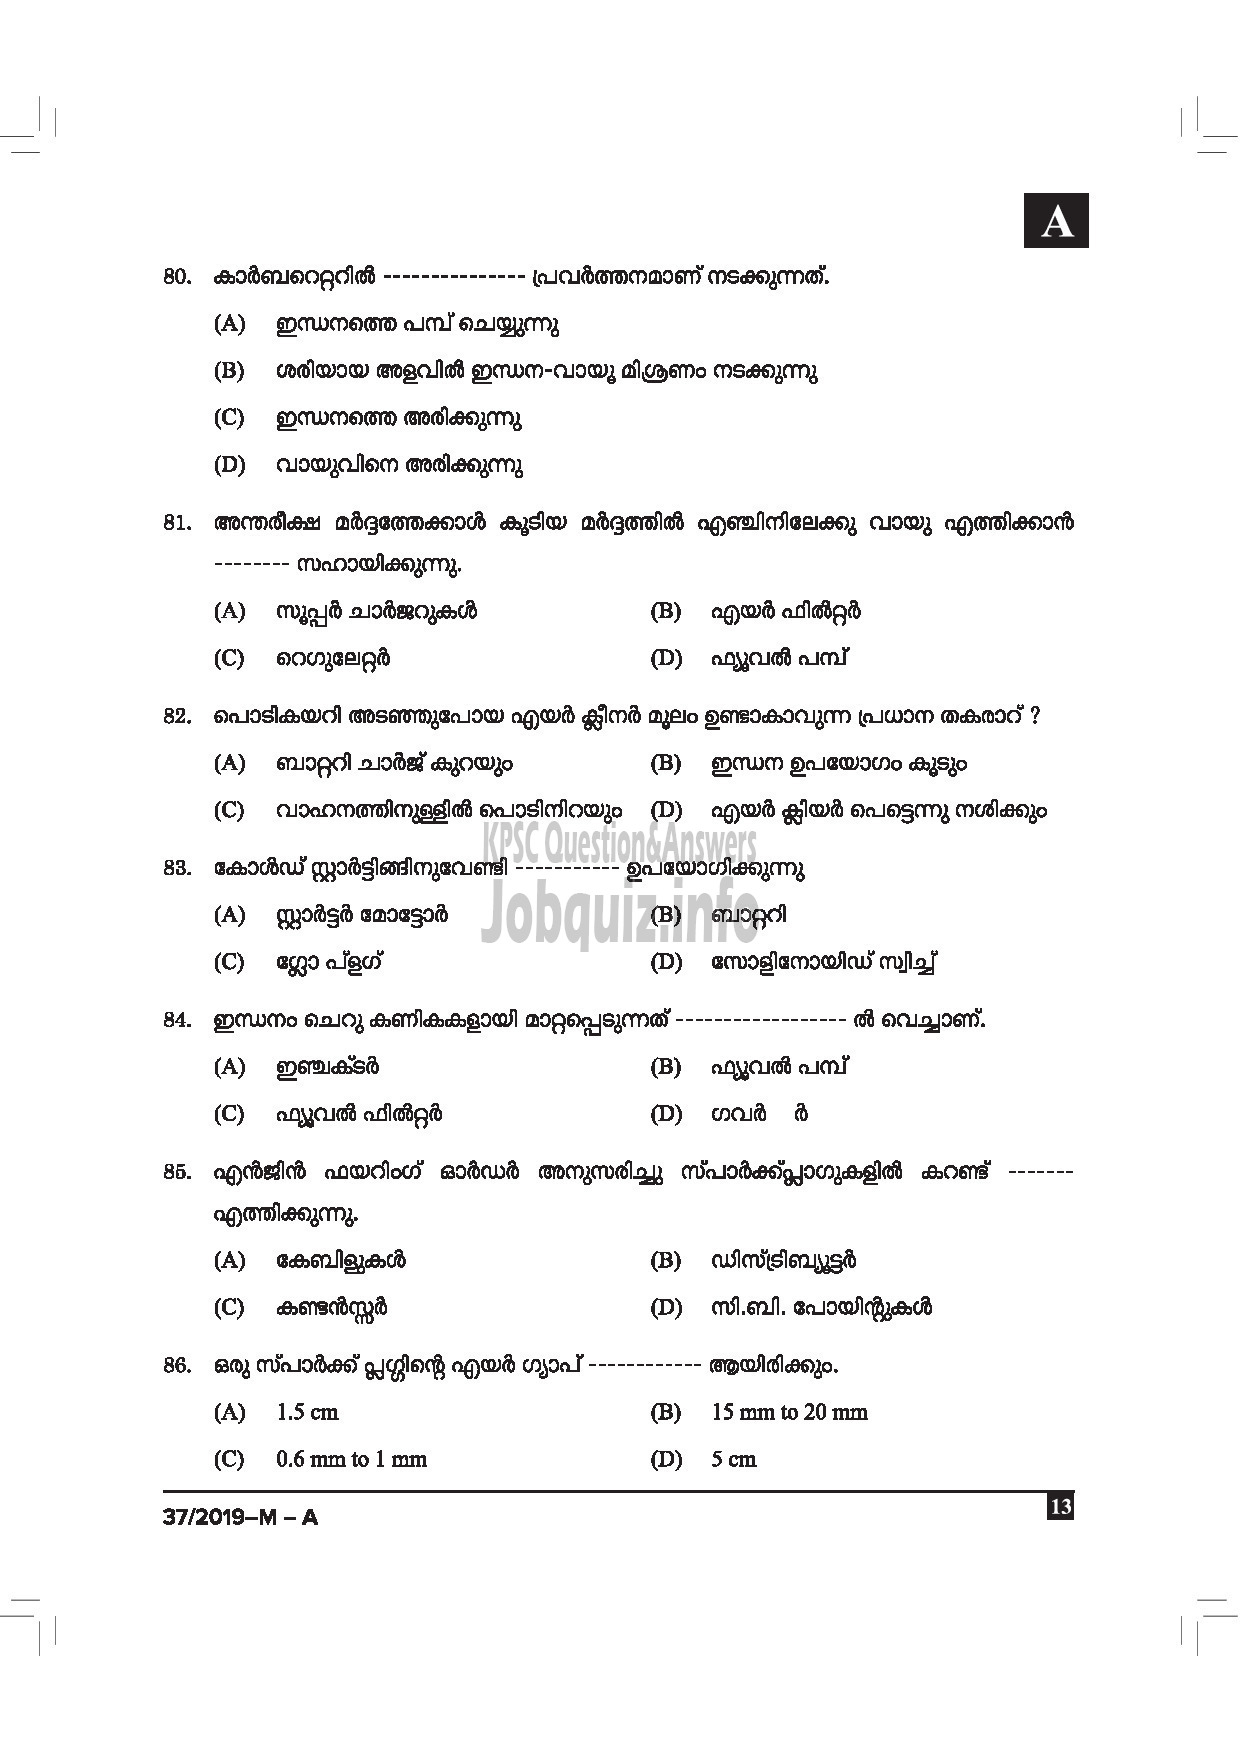 Kerala PSC Question Paper - DRIVER CUM OFFICE ATTENDANT / POLICE CONSTABLE DRIVER GOVT OWNED COMP / CORP / BOARD / POLICE MALAYALAM -13